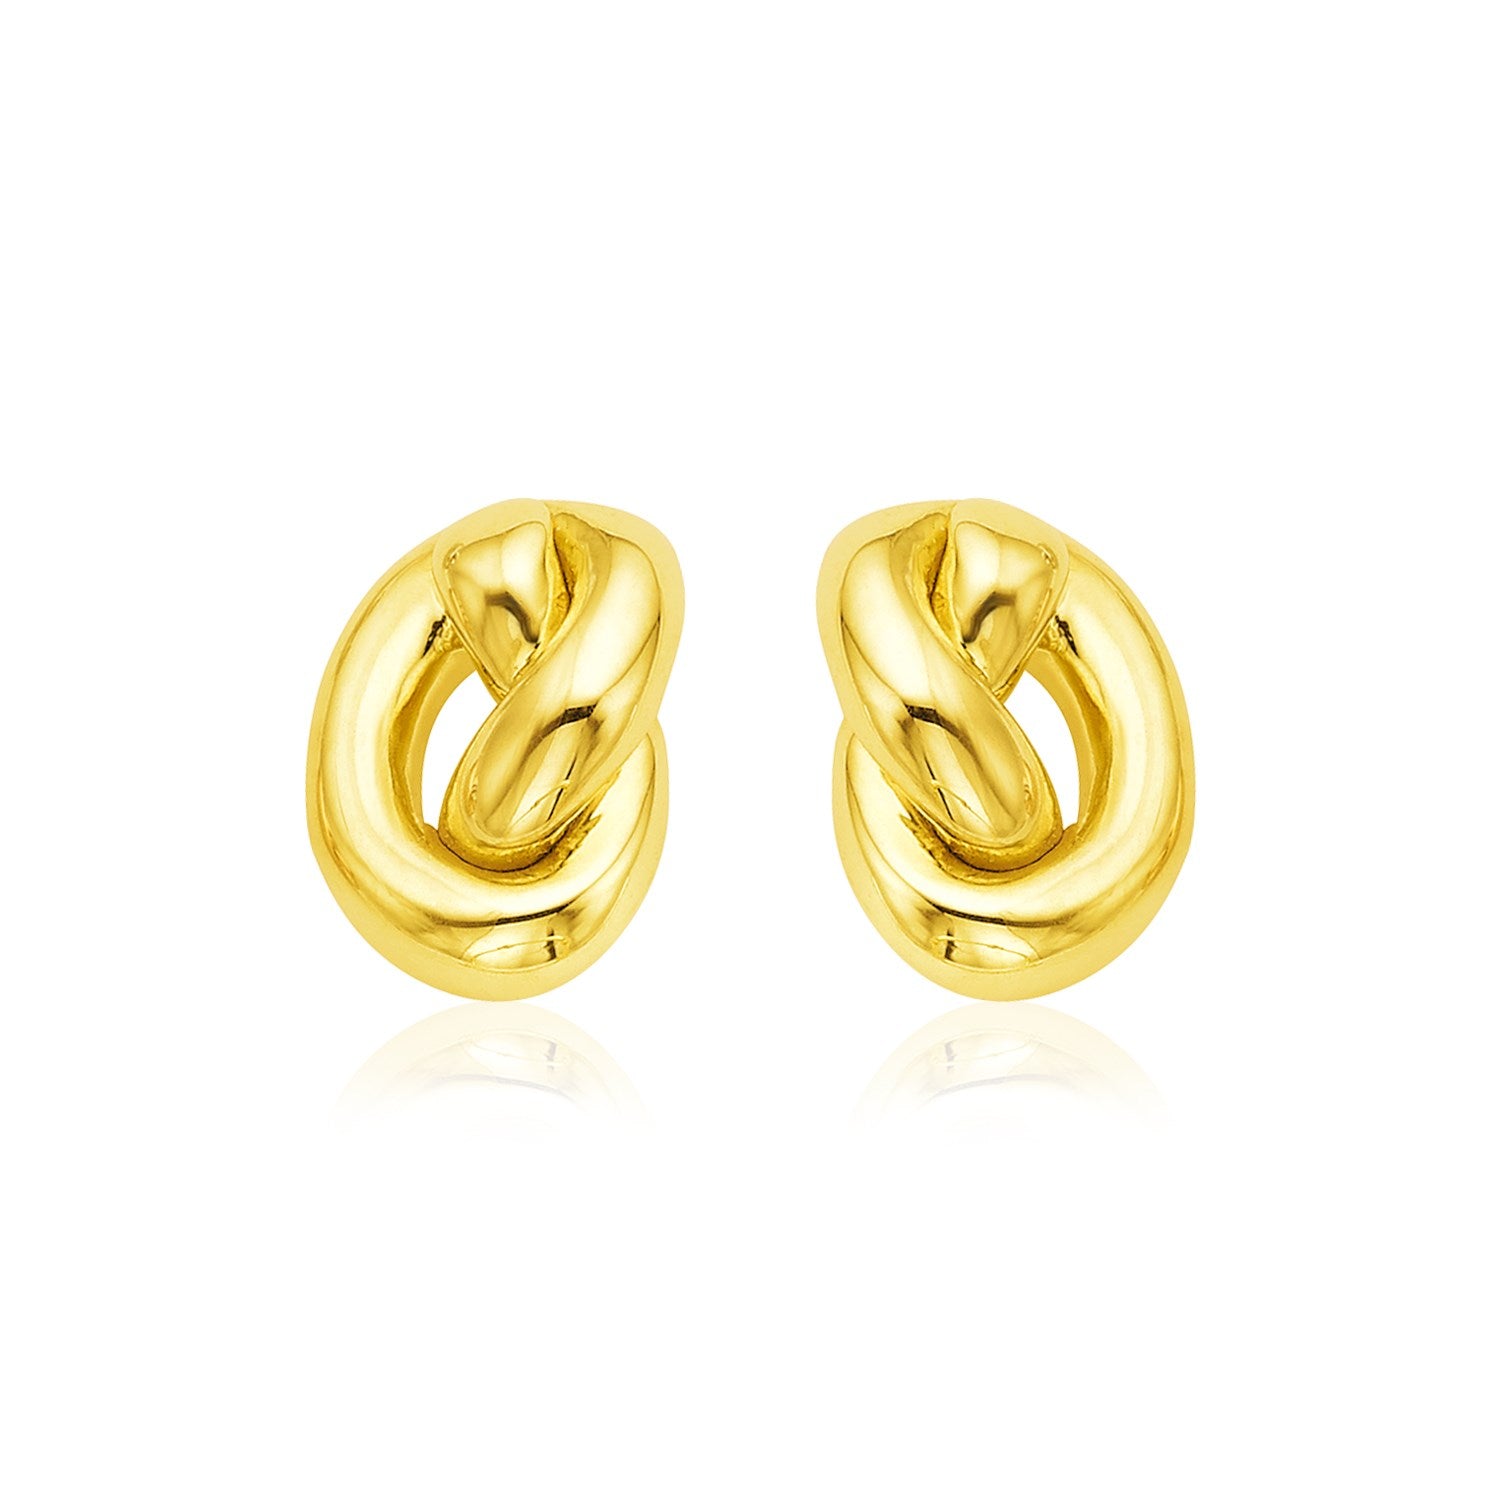 14k Yellow Gold Polished Knot Earrings